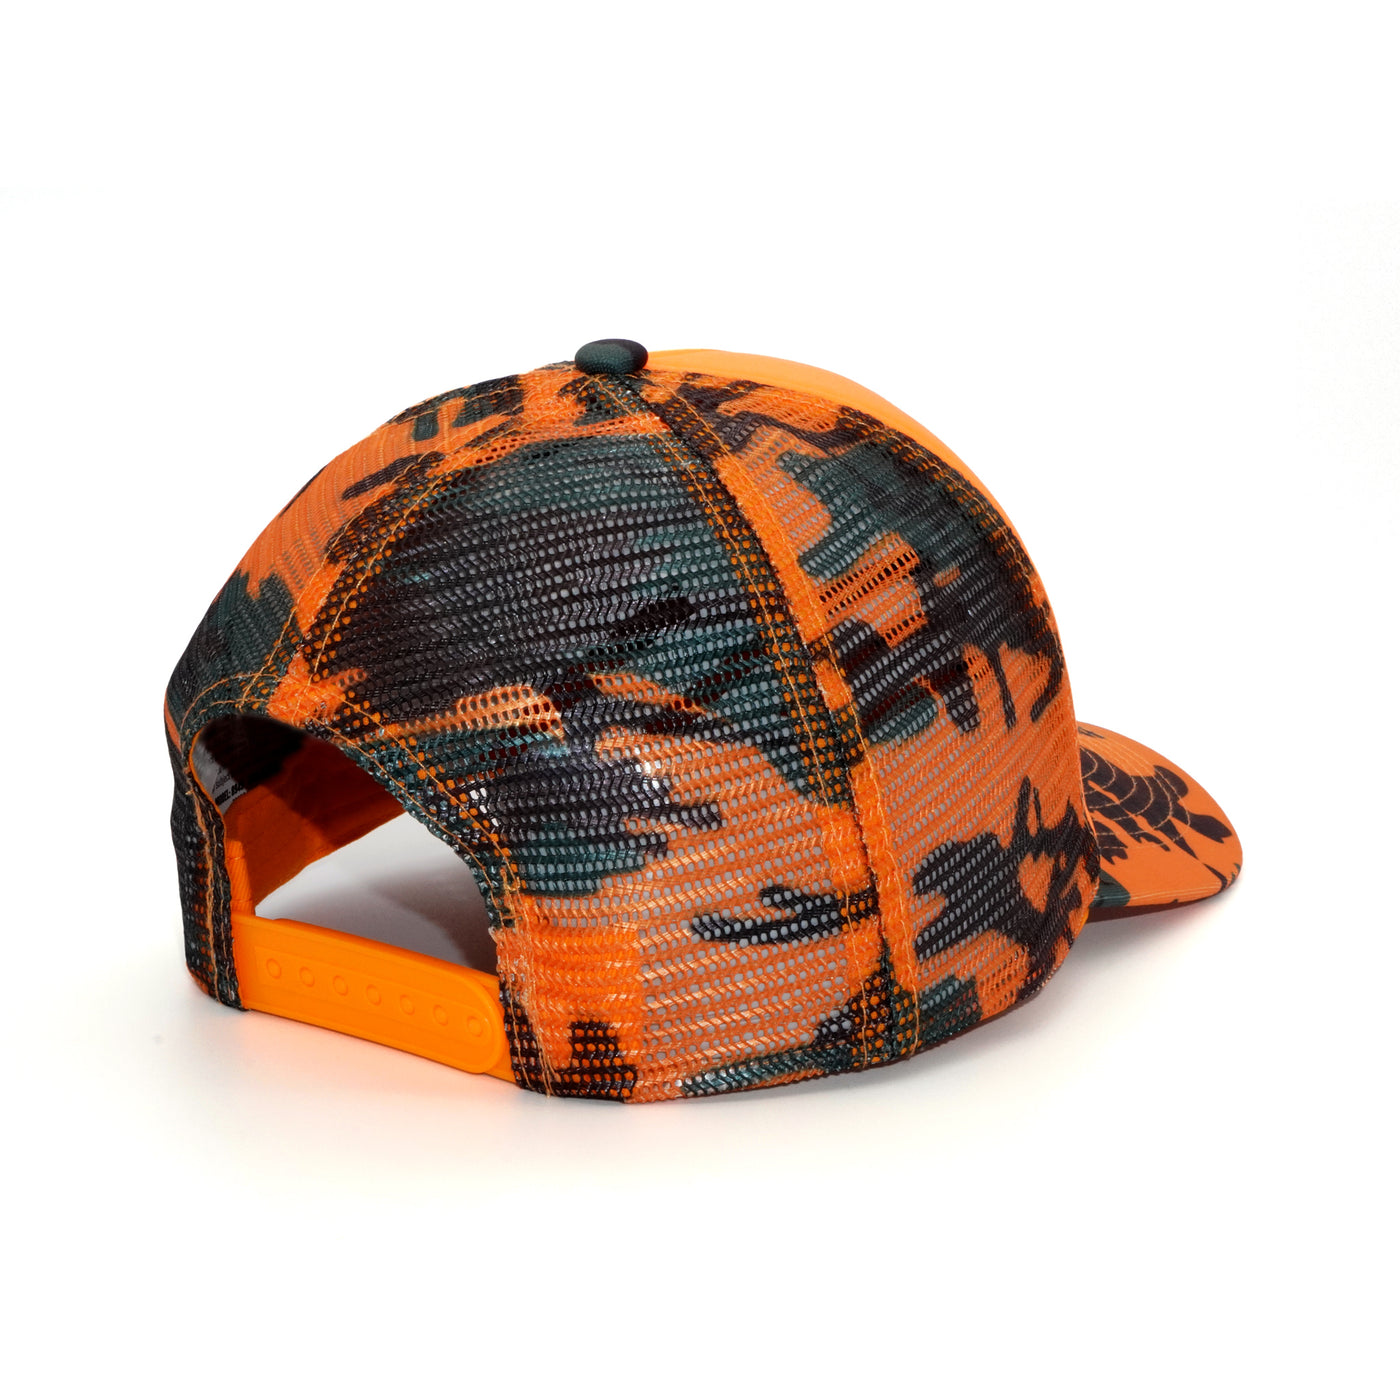 Camo Country Org/Wdl Trucker Hat